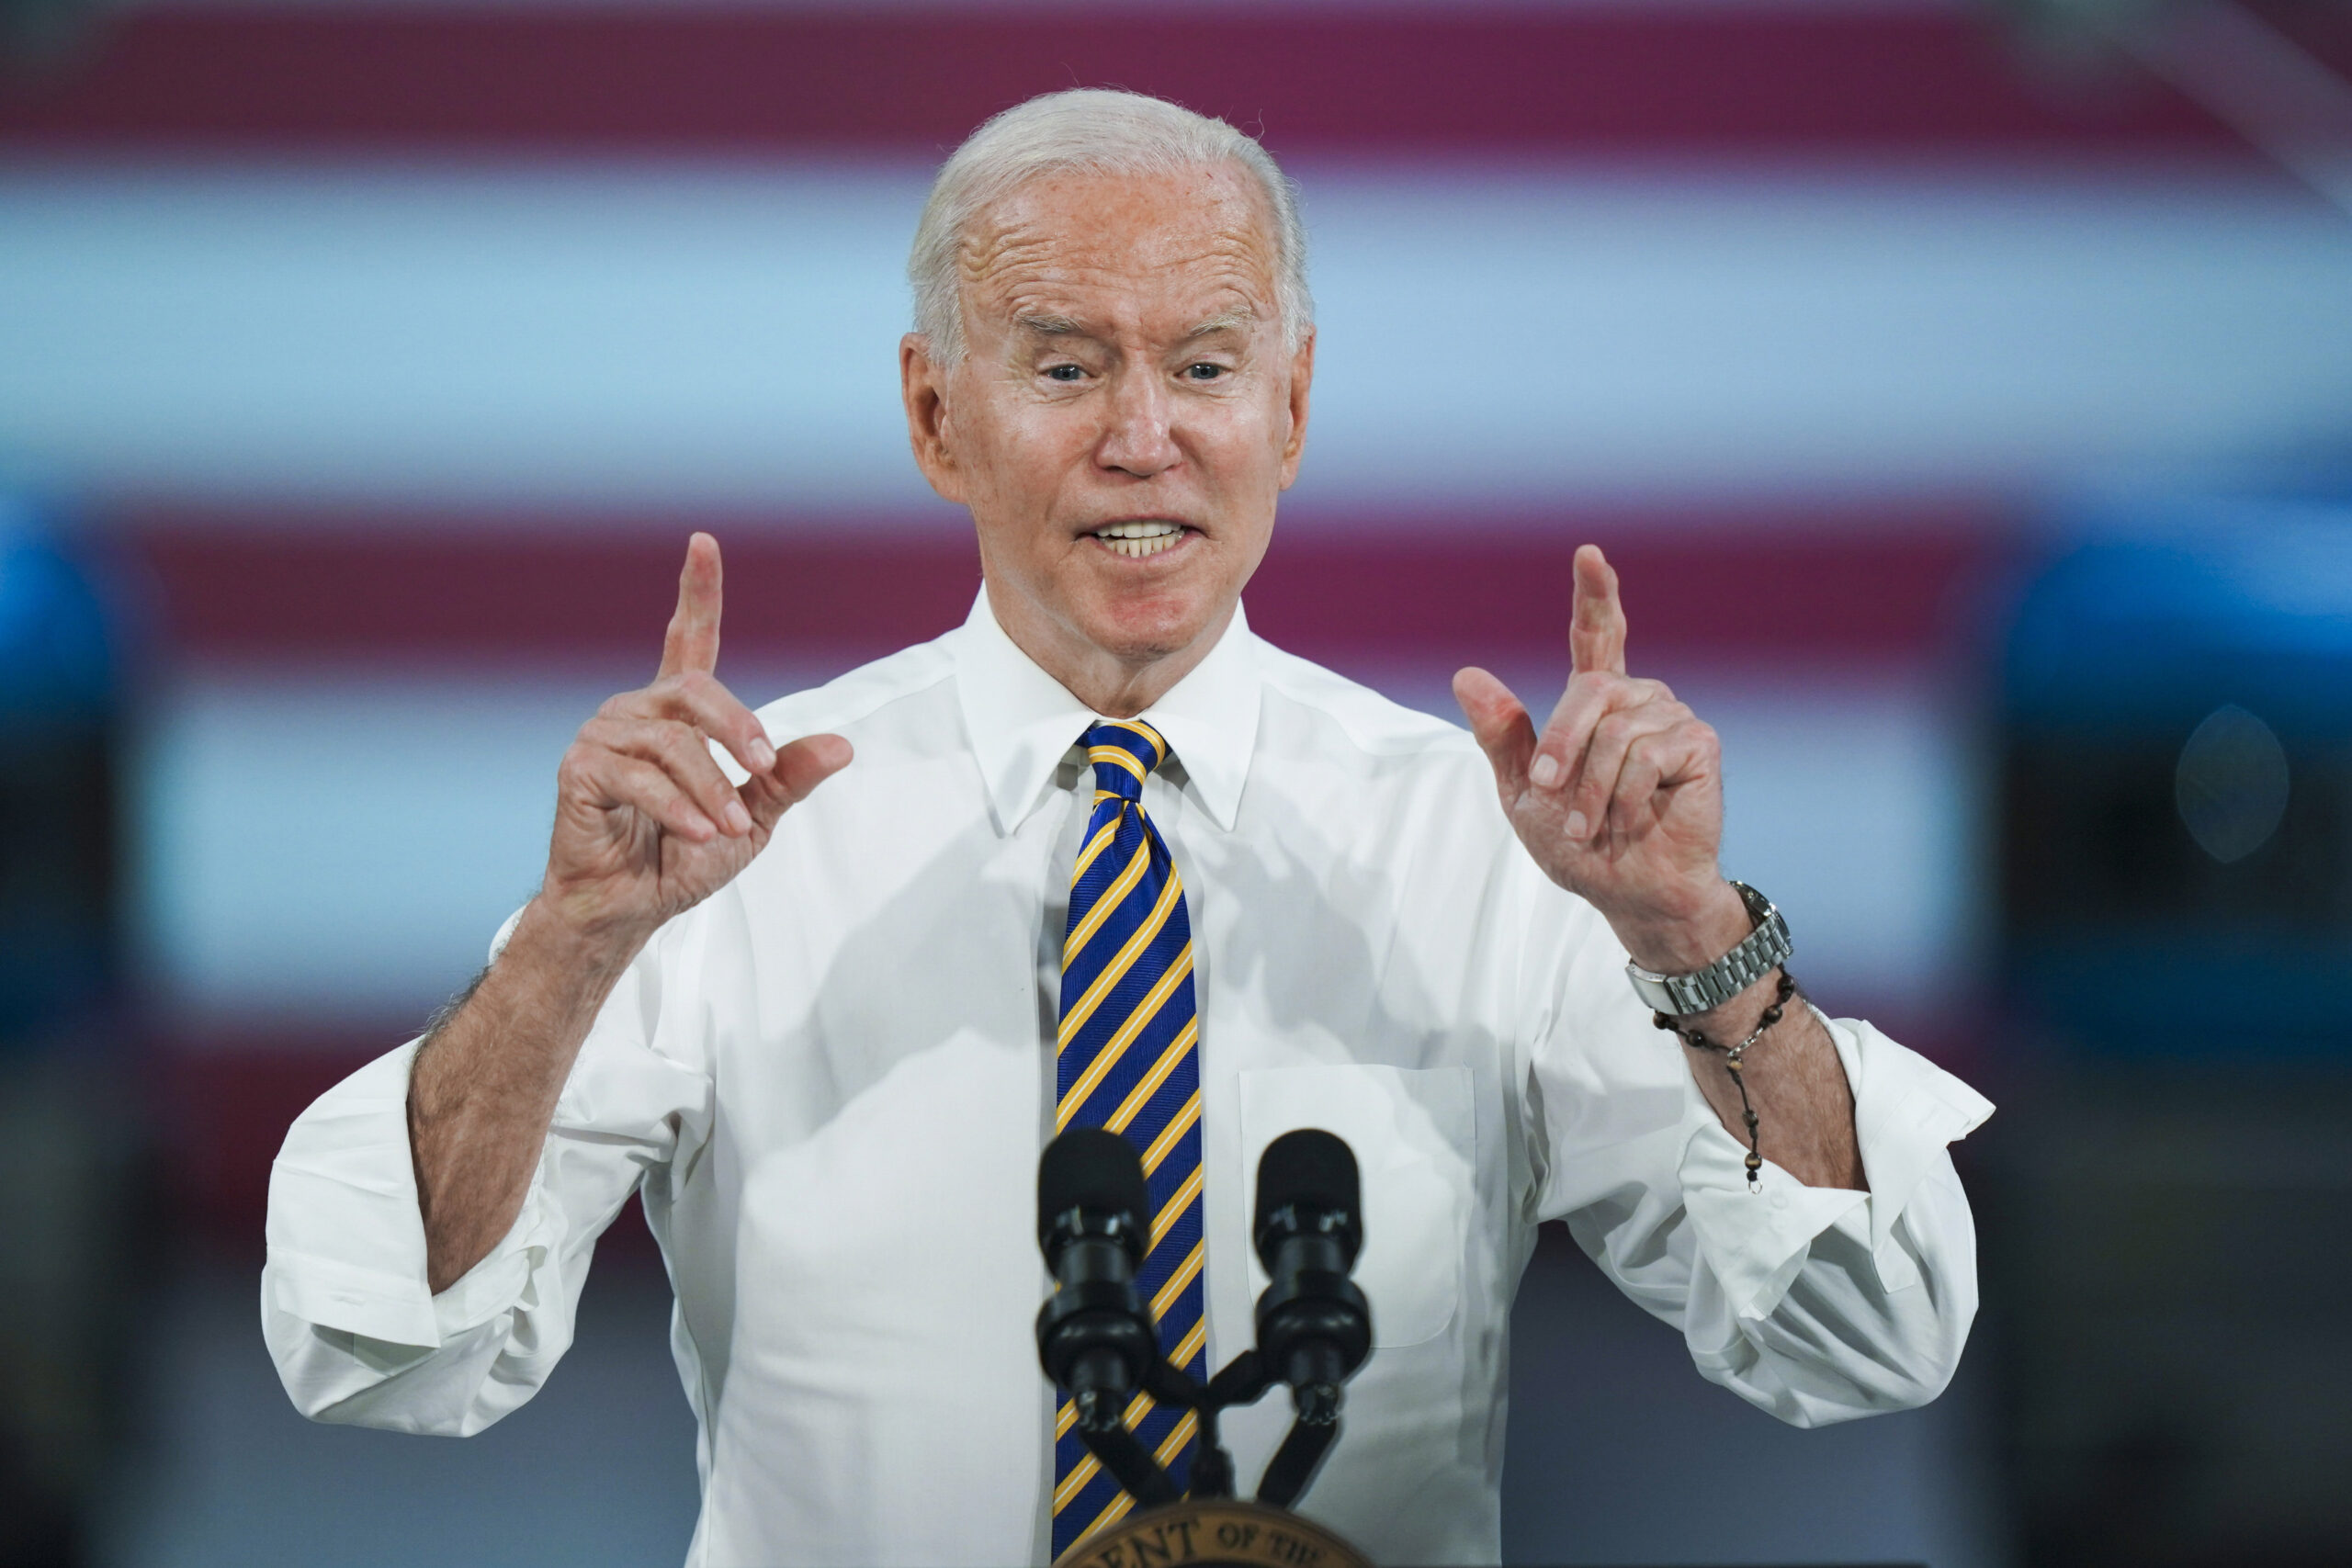 President Joe Biden speaks during a visit to the Lehigh Valley operations facility for Mack Trucks in Macungie, Pa., Wednesday, July 28, 2021. (AP Photo/Matt Rourke)